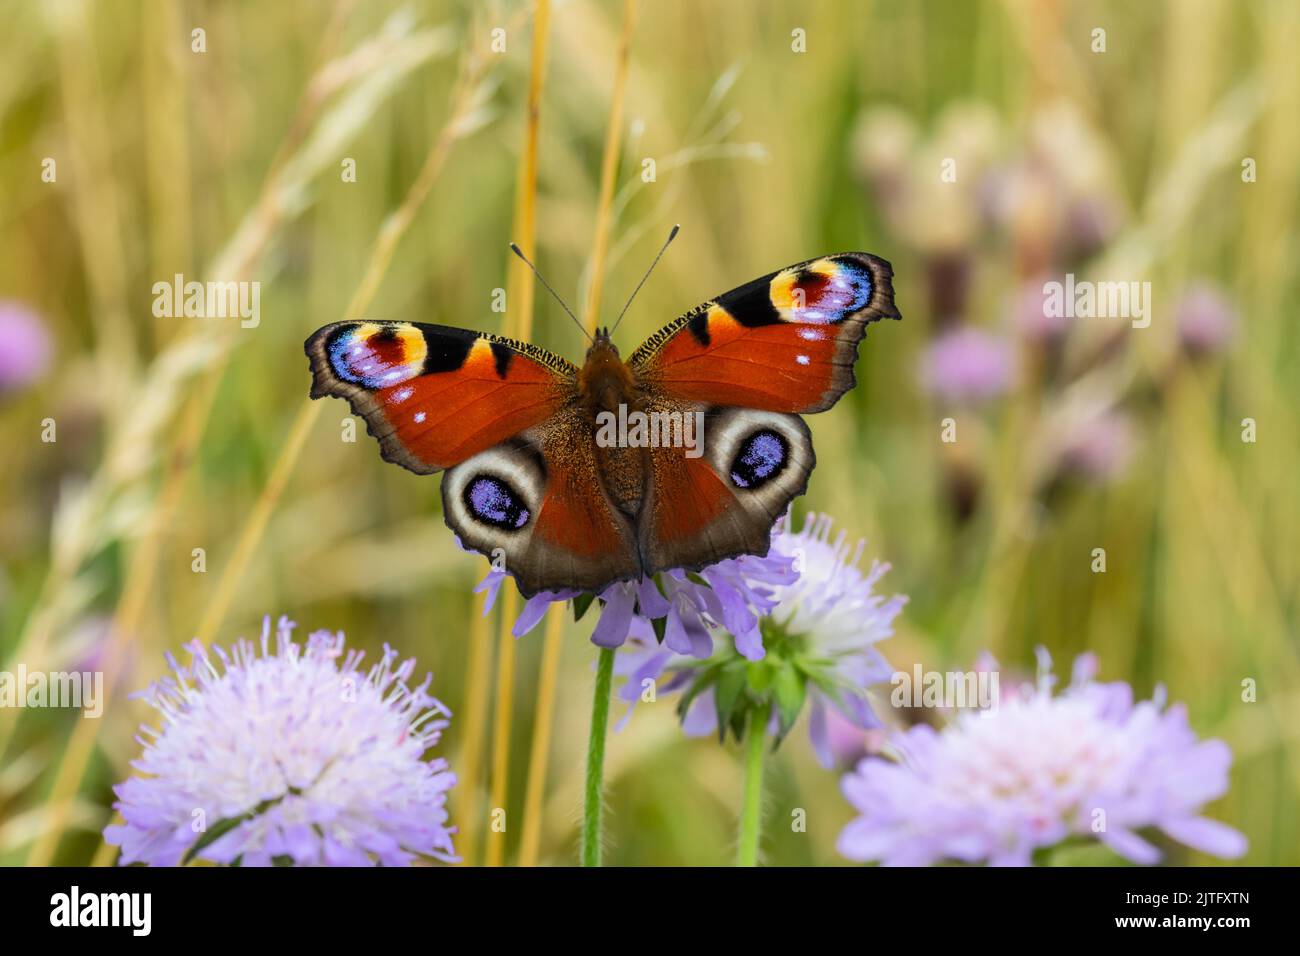 A European peacock butterfly, Aglais io, basking in the sun with its wings wide open. Stock Photo